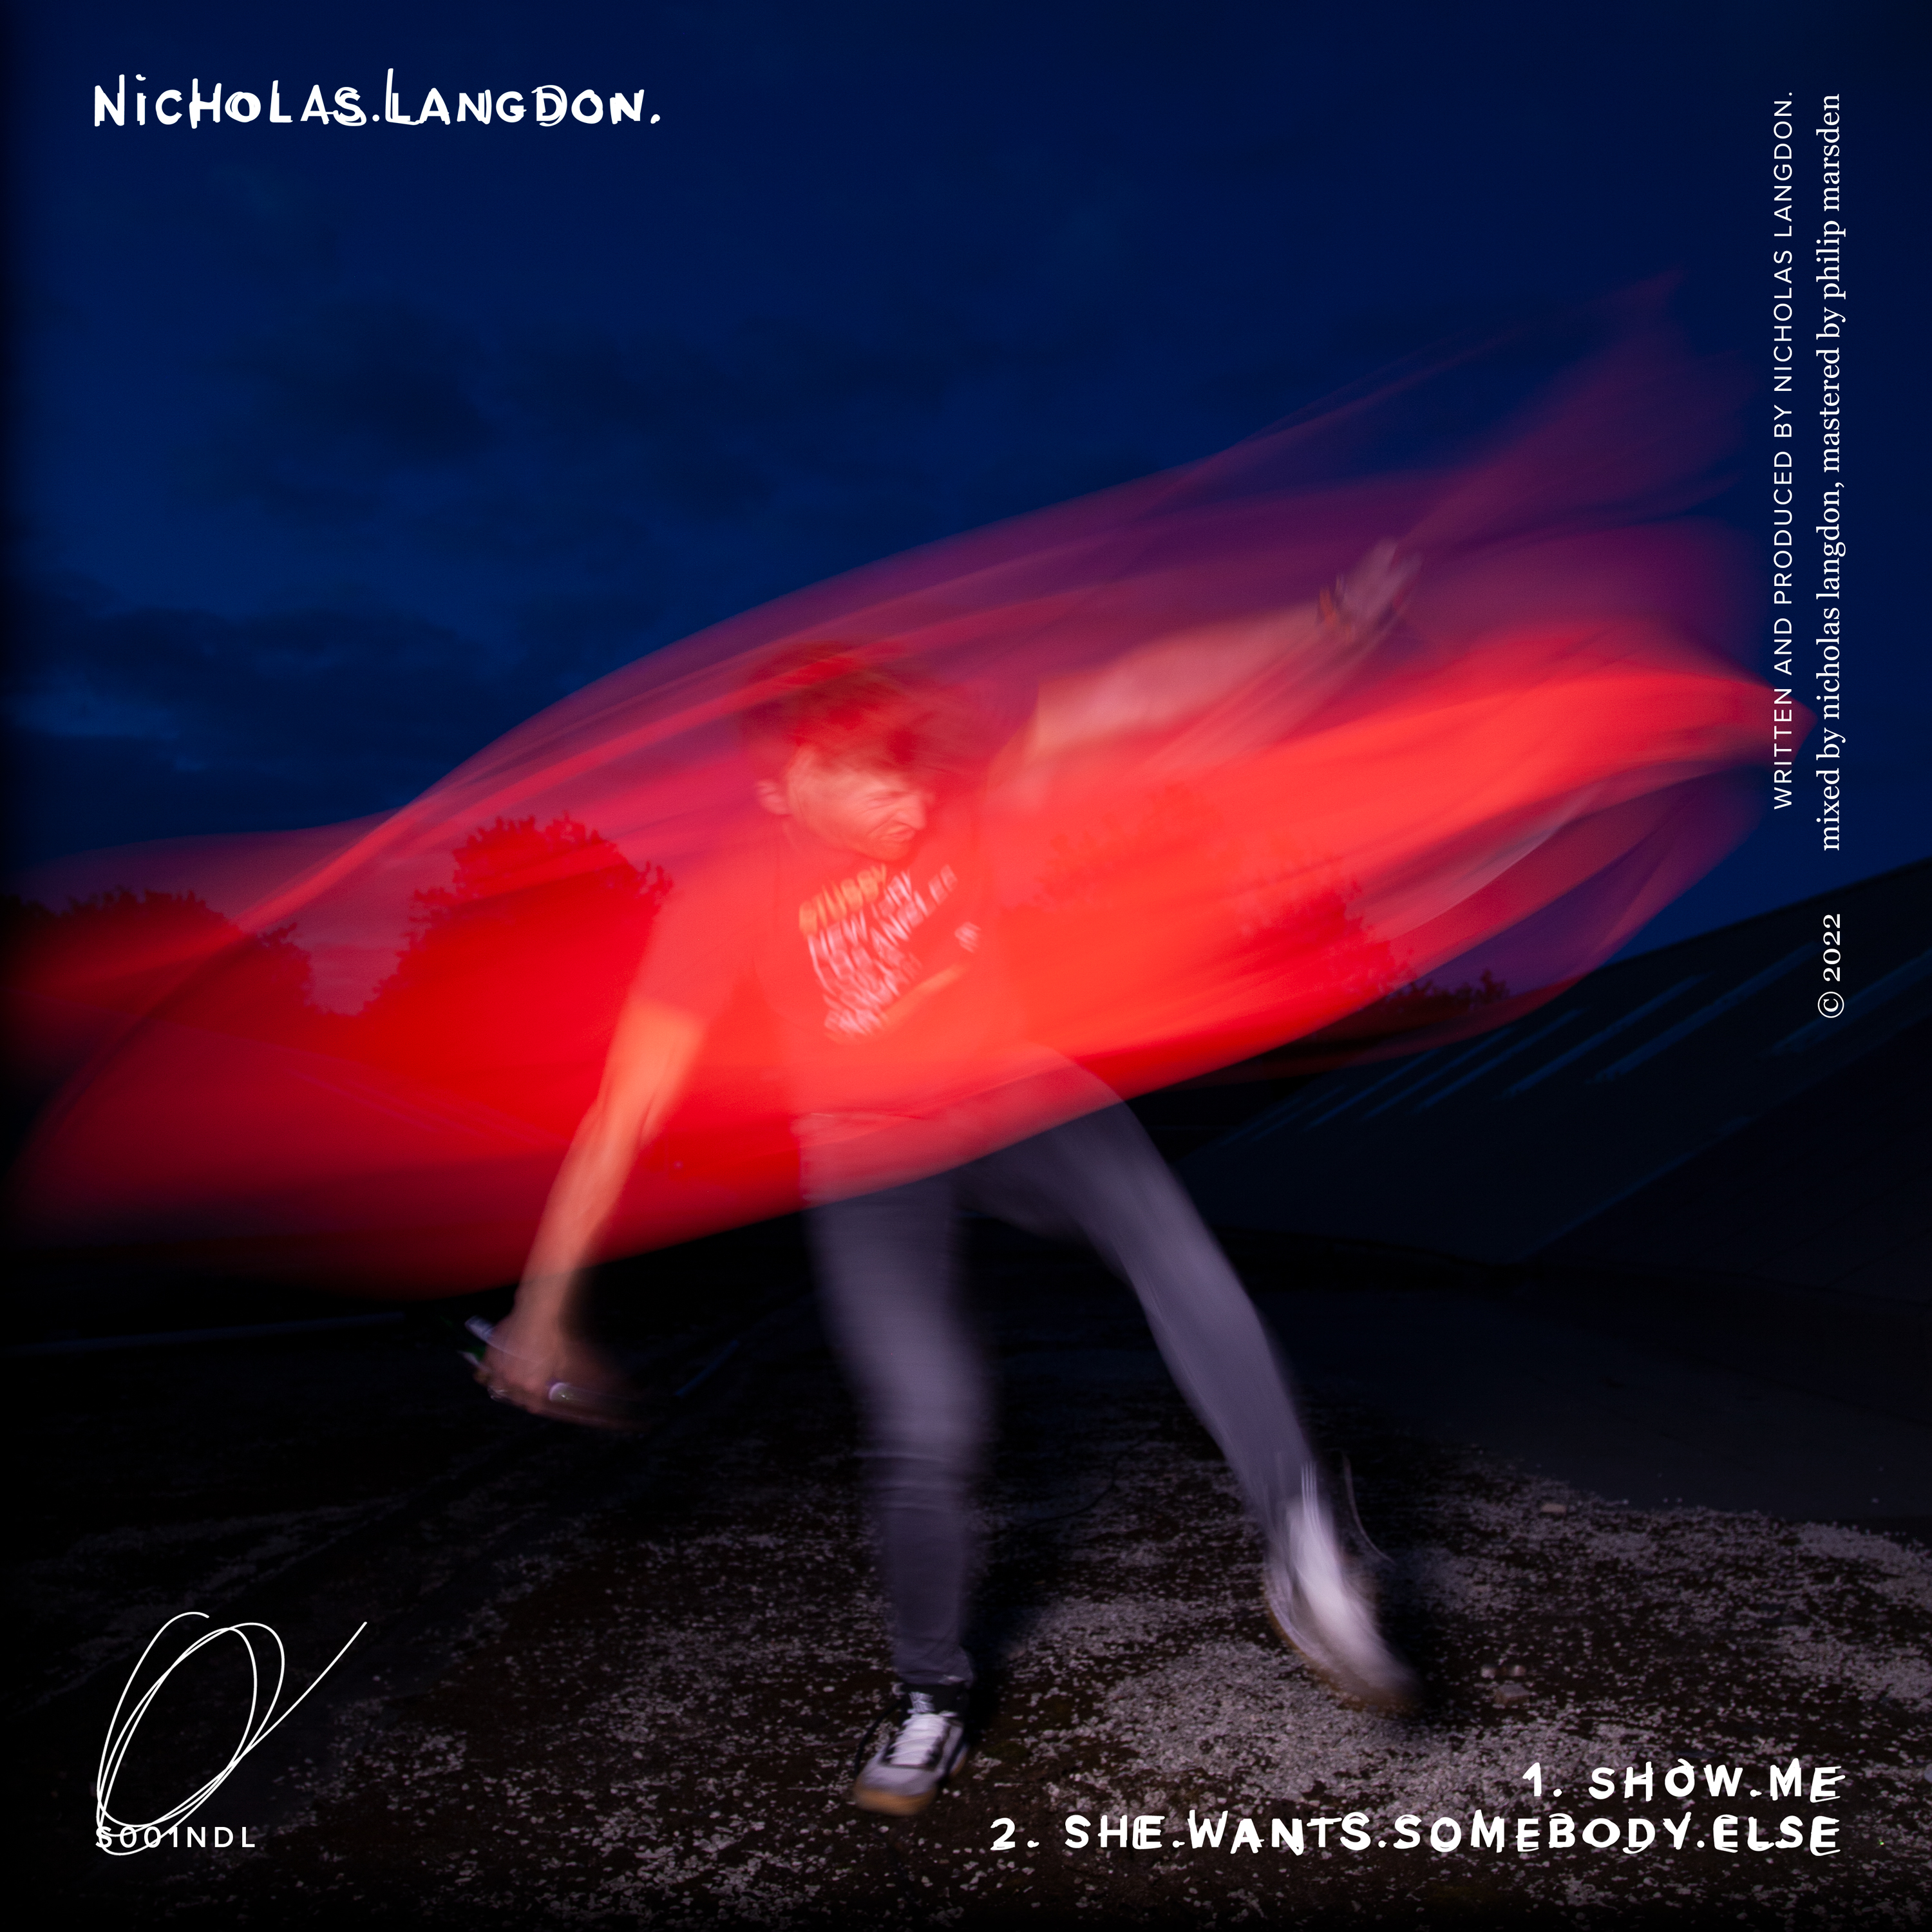 Nicholas Langdon – “Show Me What You Live For”